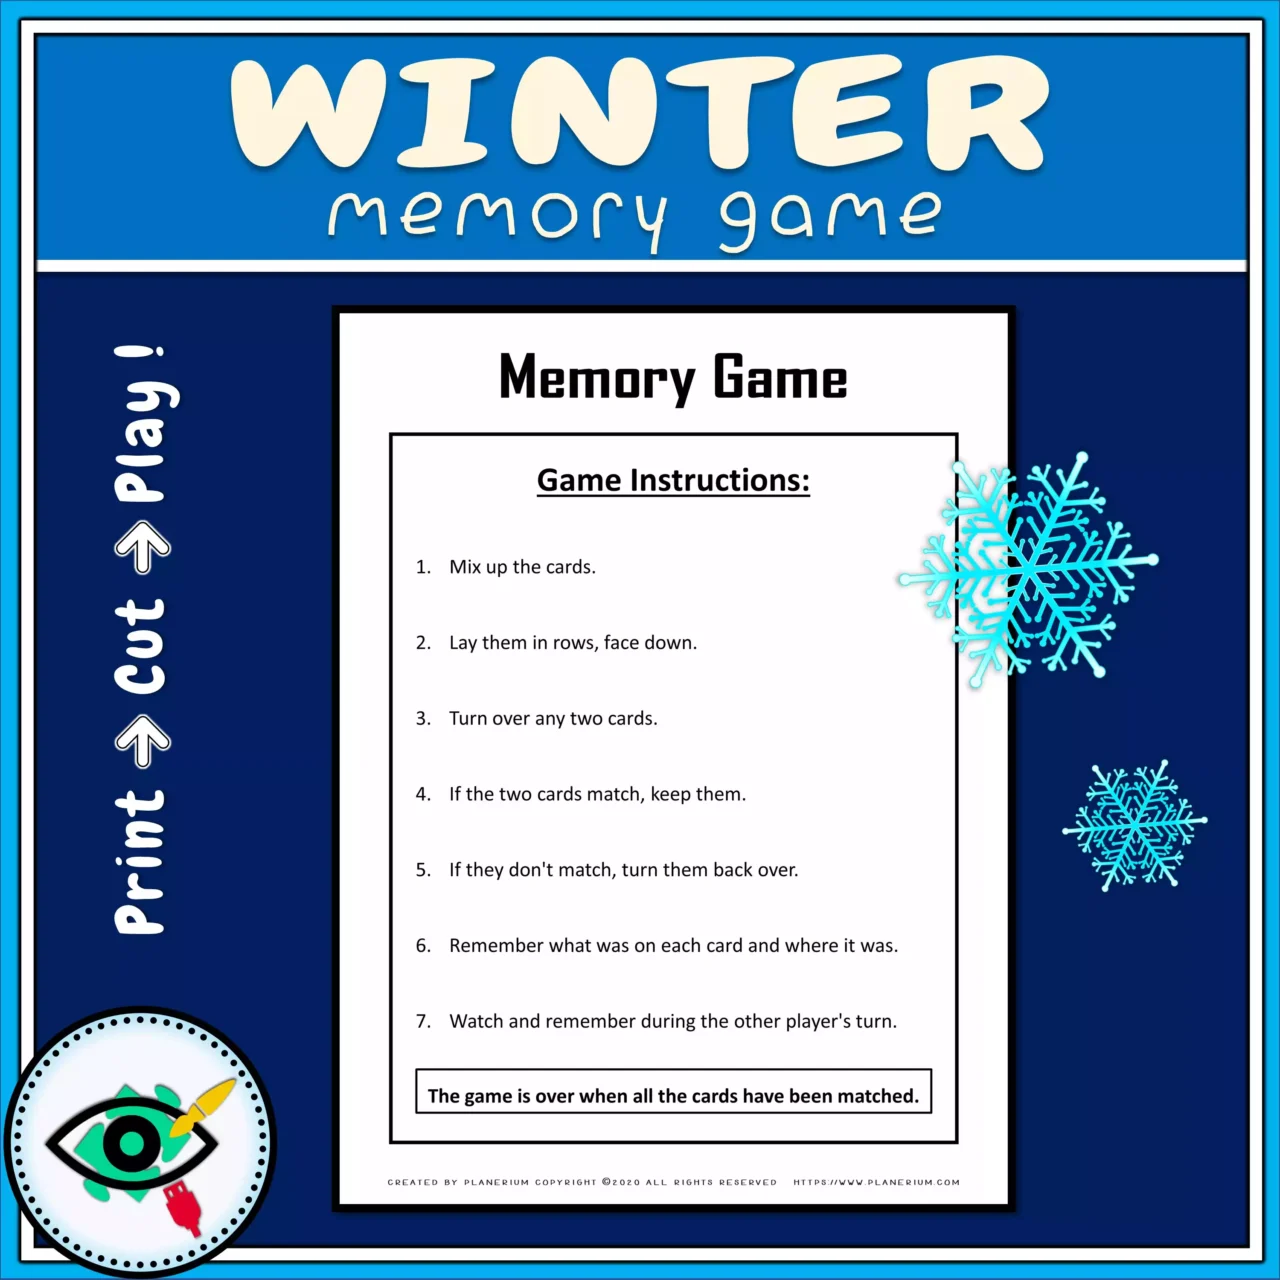 Winter - Memory Game - Image Title 3